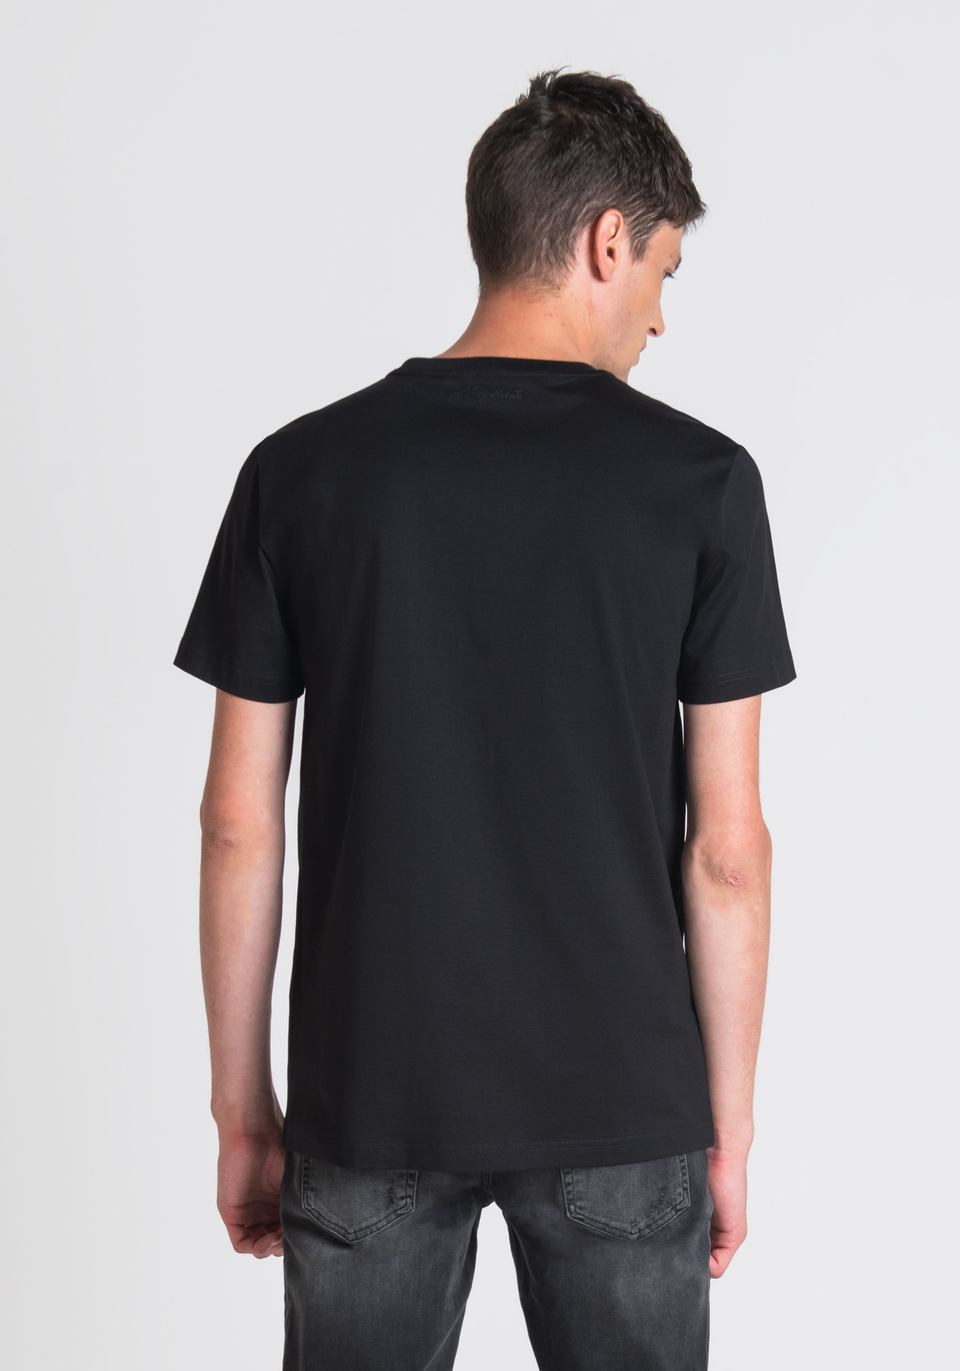 SLIM FIT T-SHIRT IN COTTON WITH SHINY STUDS - Antony Morato Online Shop